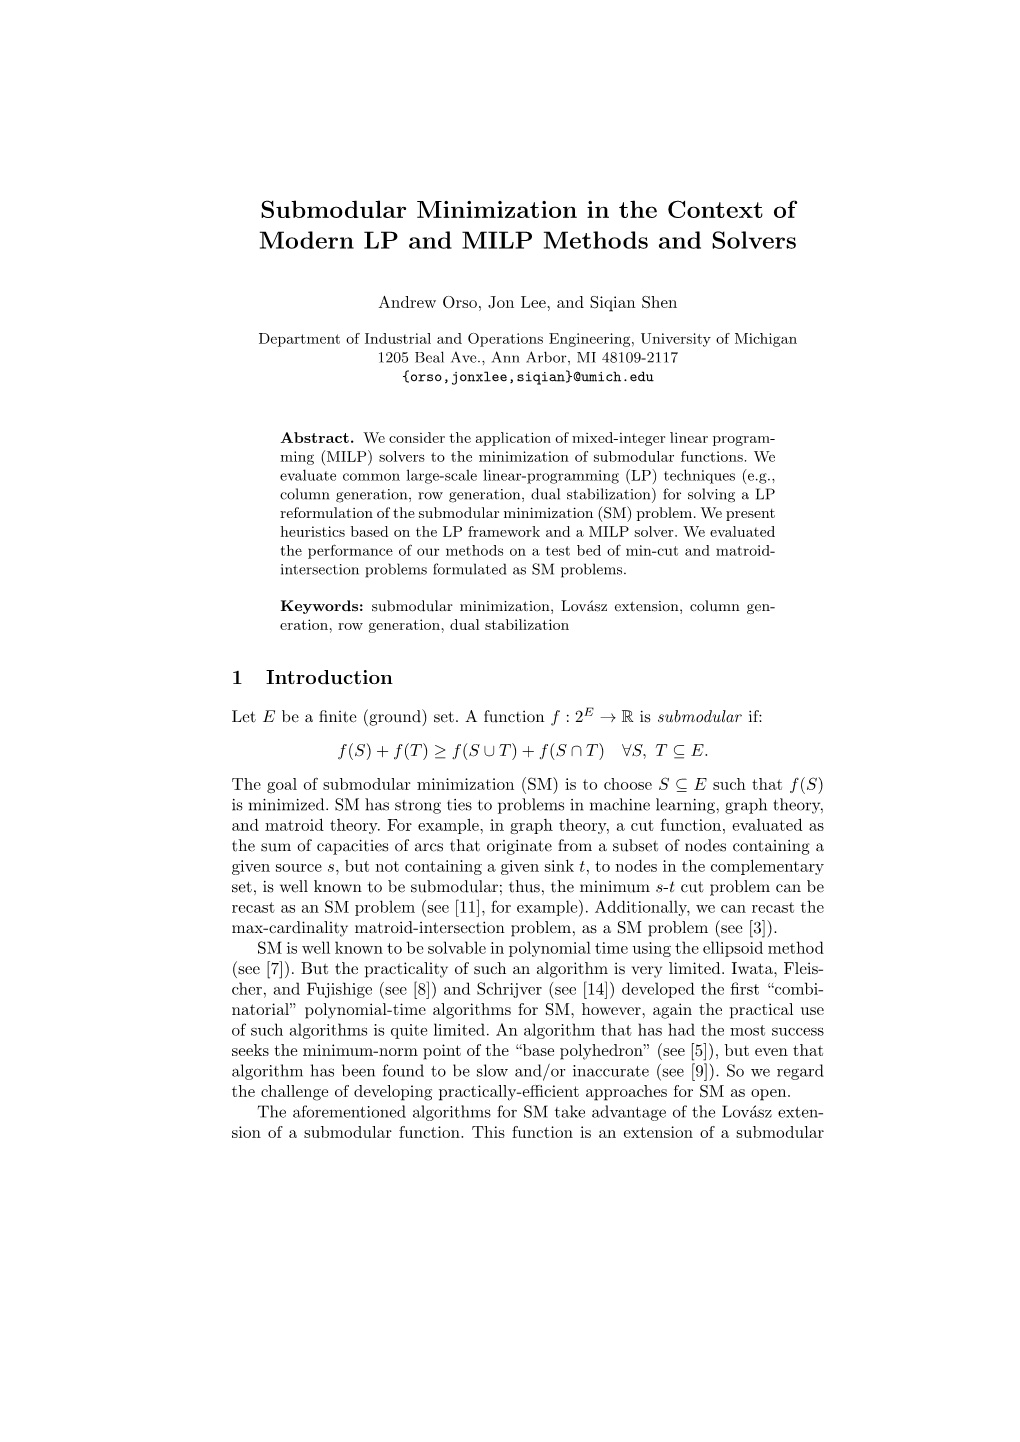 Submodular Minimization in the Context of Modern LP and MILP Methods and Solvers